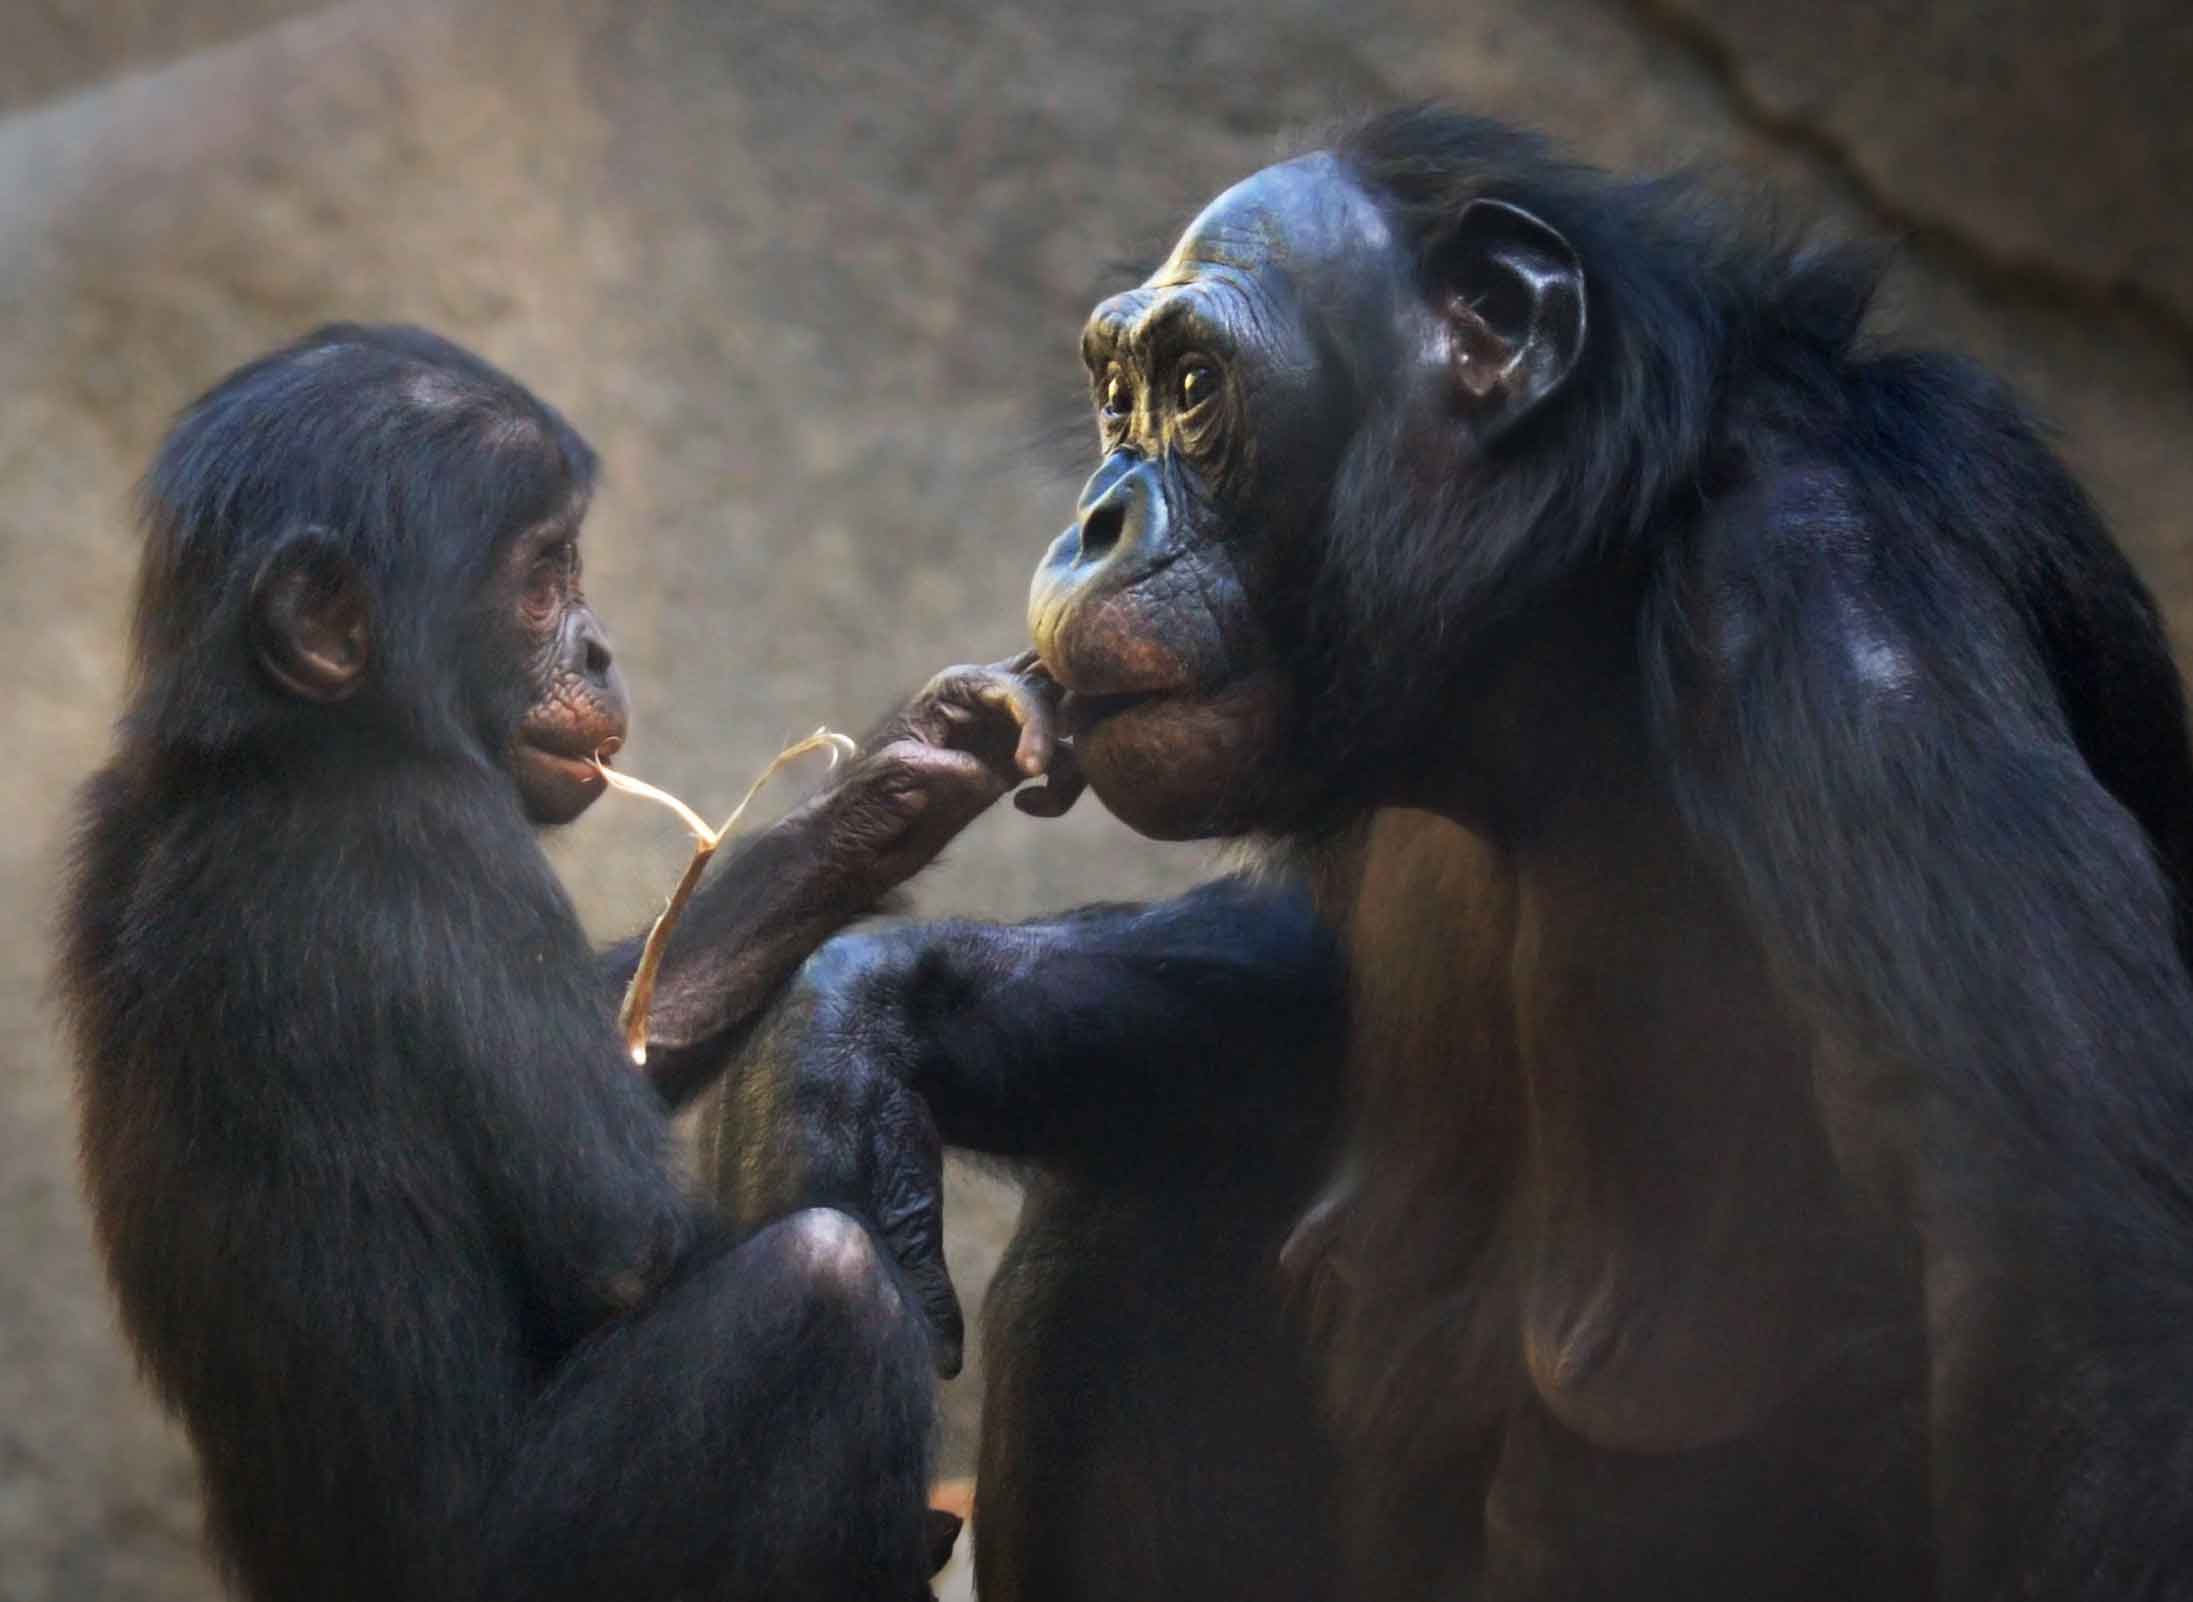 Bonobo infant and mother looking at each other